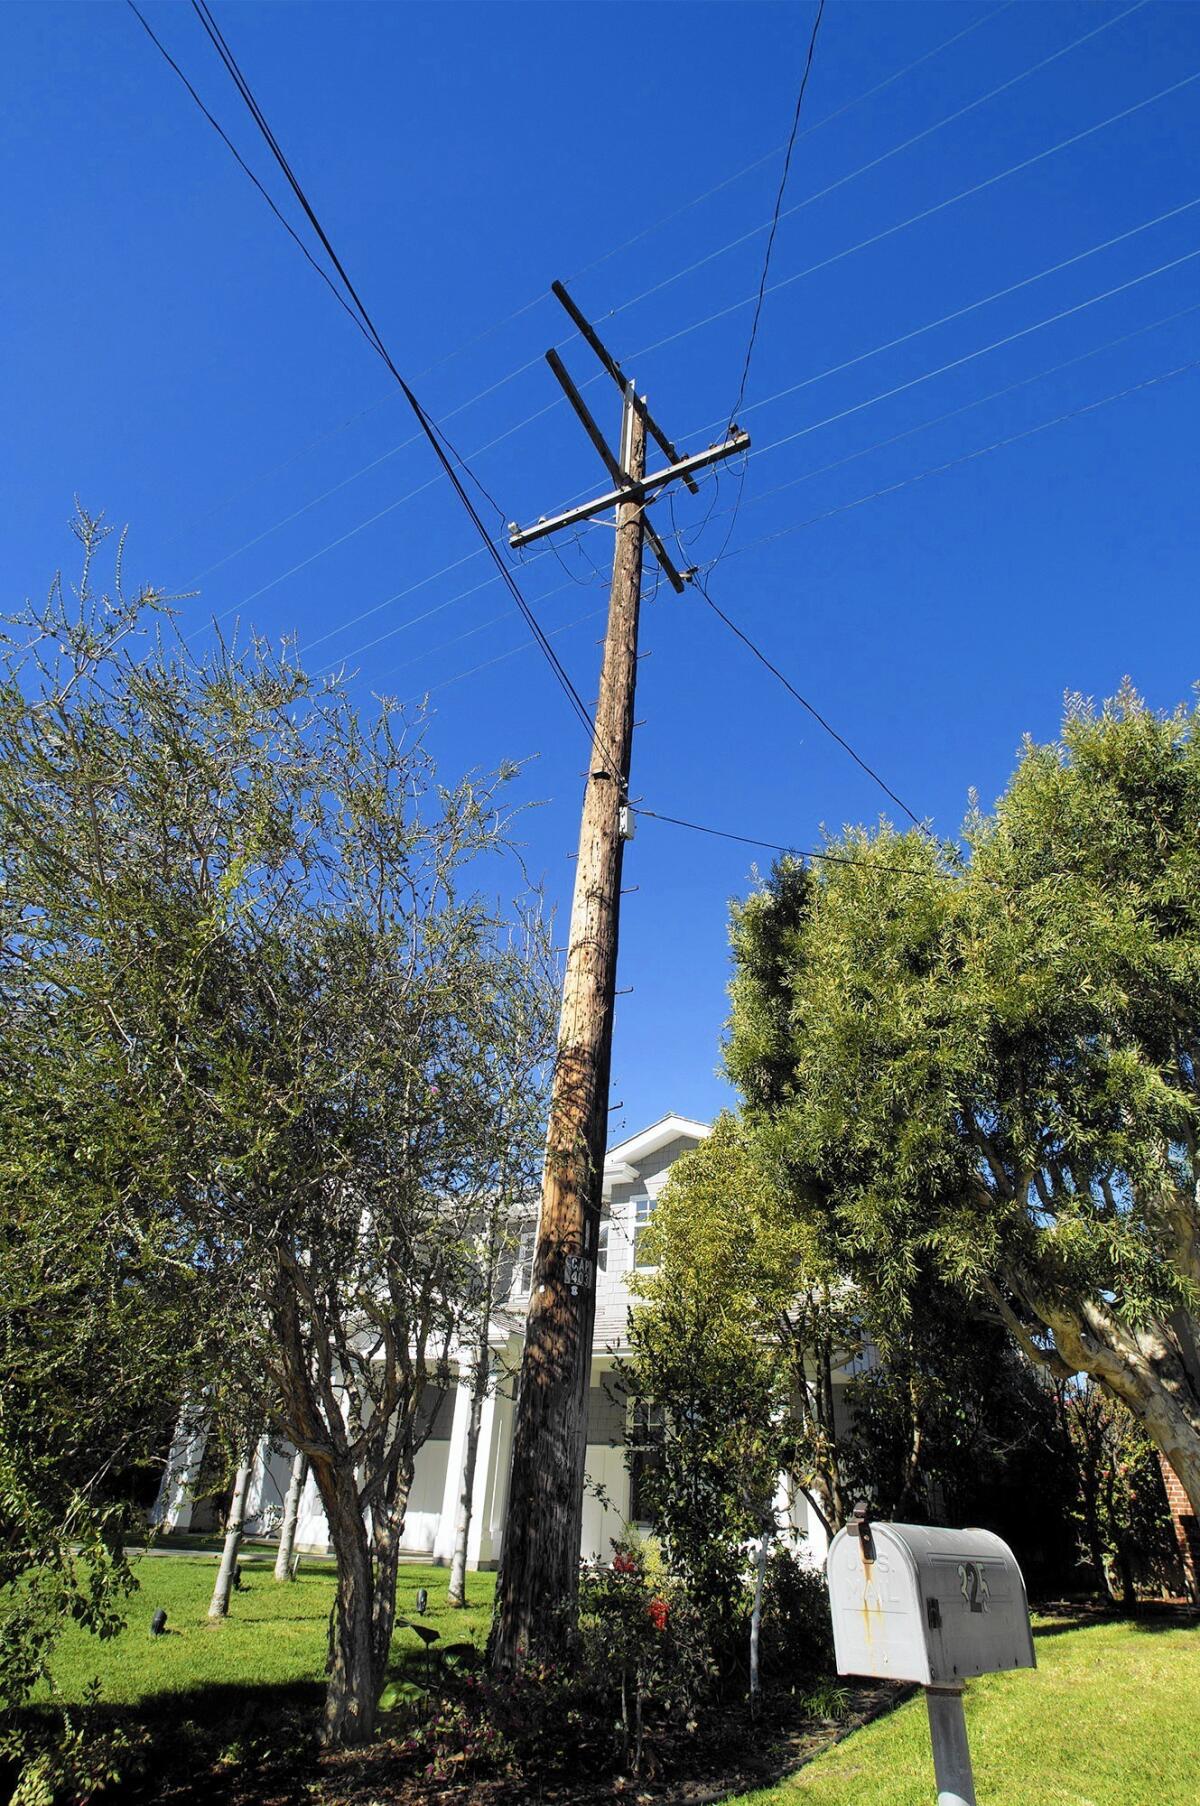 A vote of homeowners in Newport Heights on whether to place utility lines underground could happen in October after the Newport Beach City Council cleared the way Tuesday.